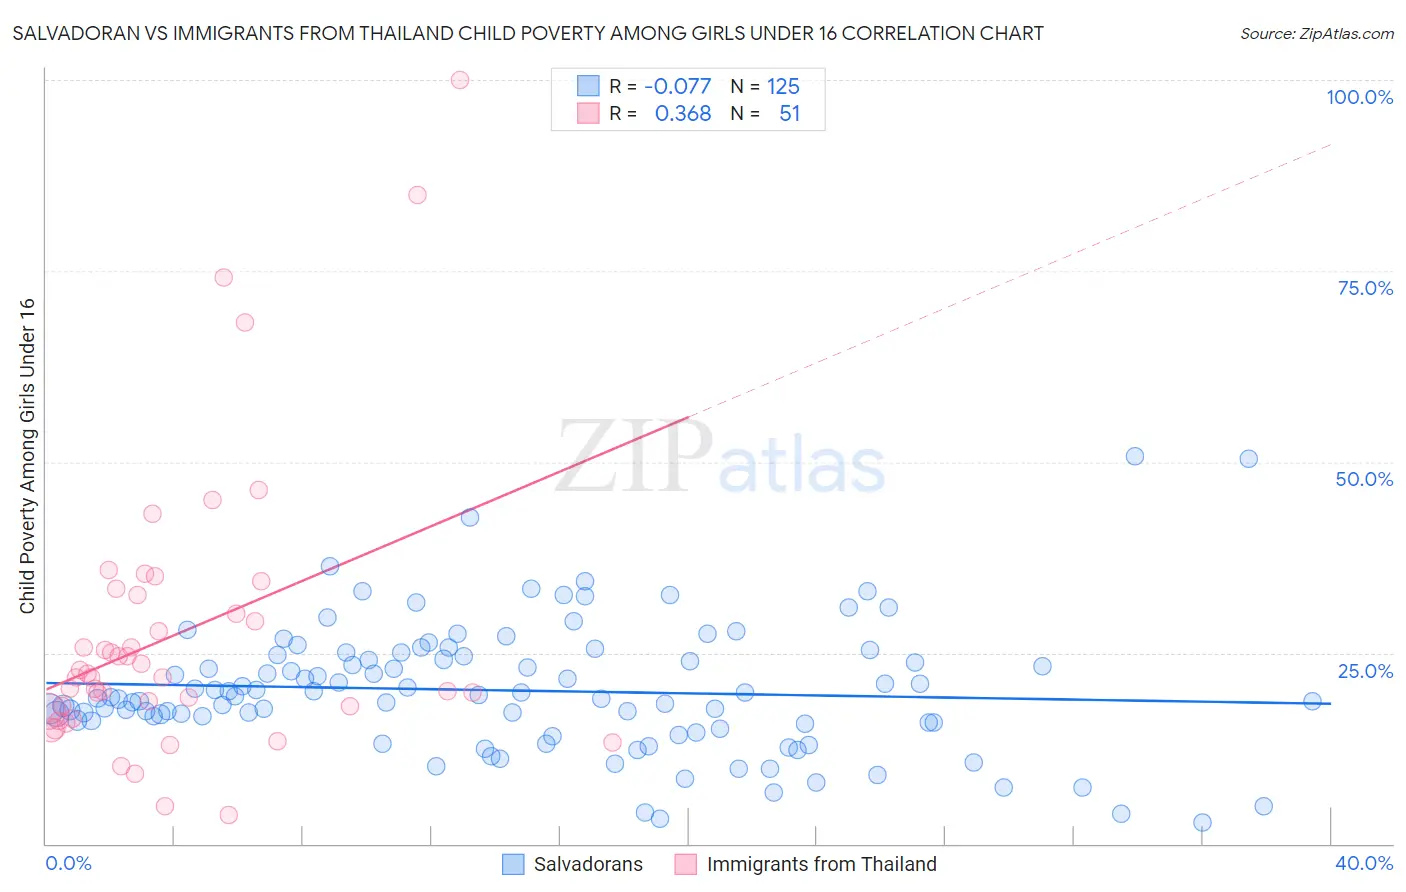 Salvadoran vs Immigrants from Thailand Child Poverty Among Girls Under 16